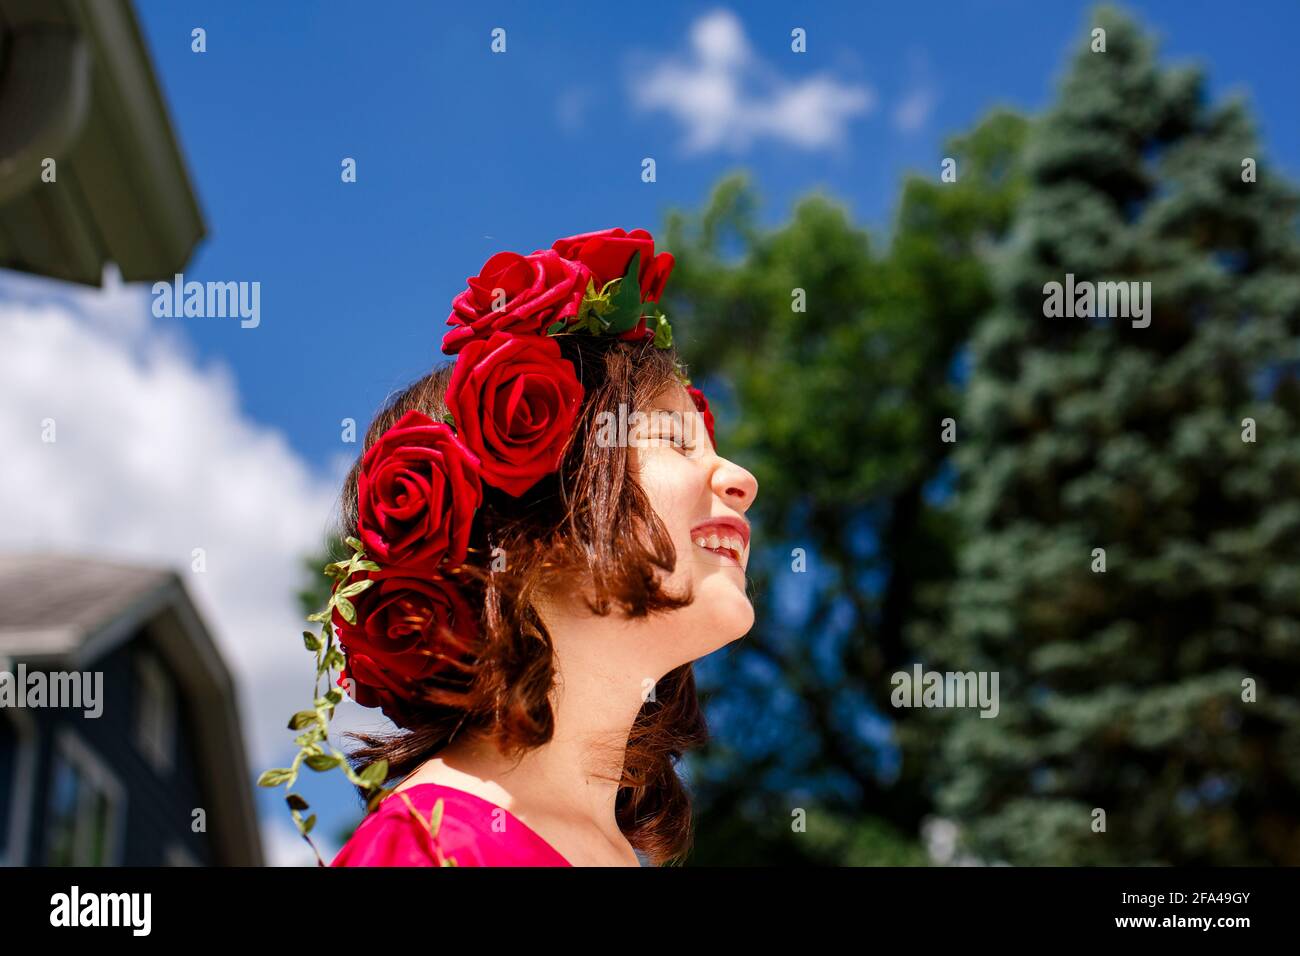 A beautiful girl with a crown of roses smiles under a blue sky Stock Photo